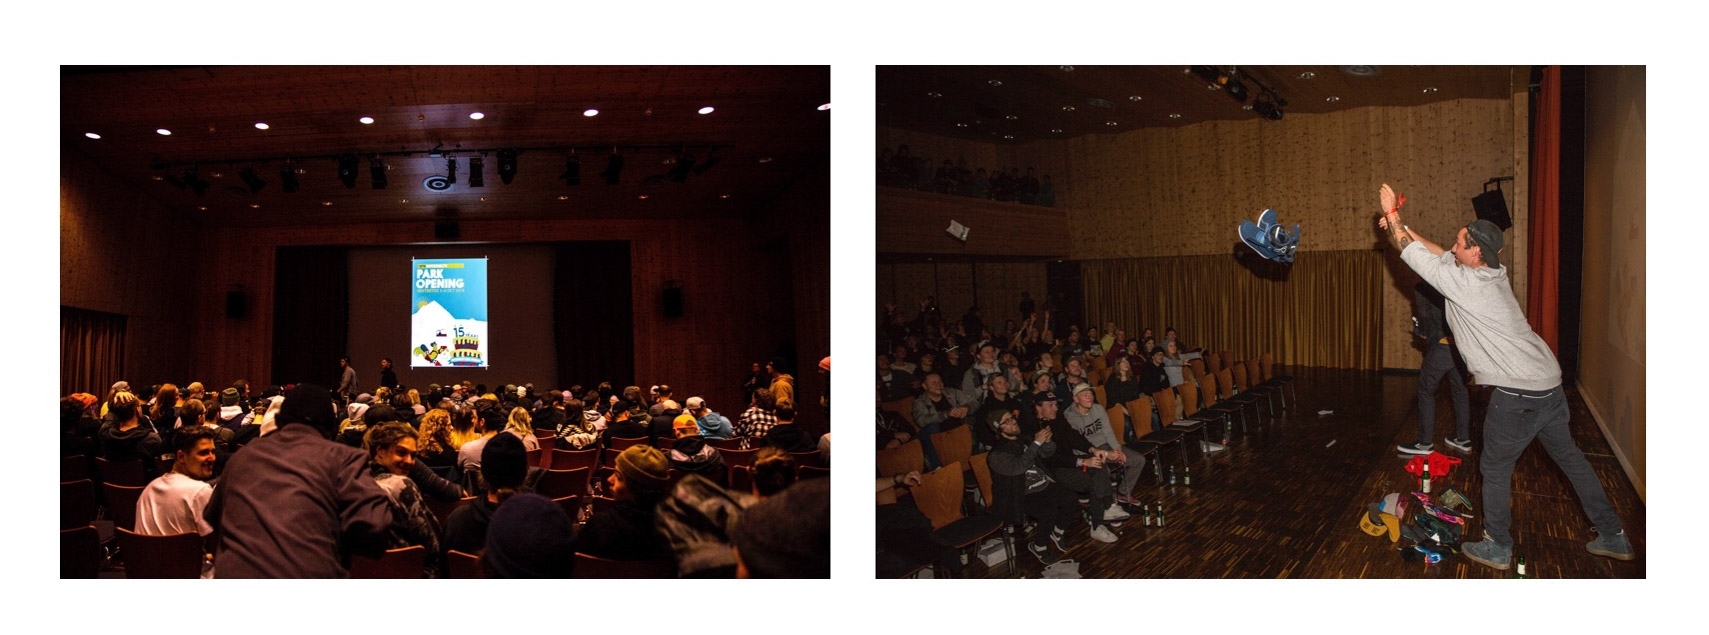 5.Max Glatzl keeps the audience on their toes at the movie night. Photos by Andreas Monsberger.jpg